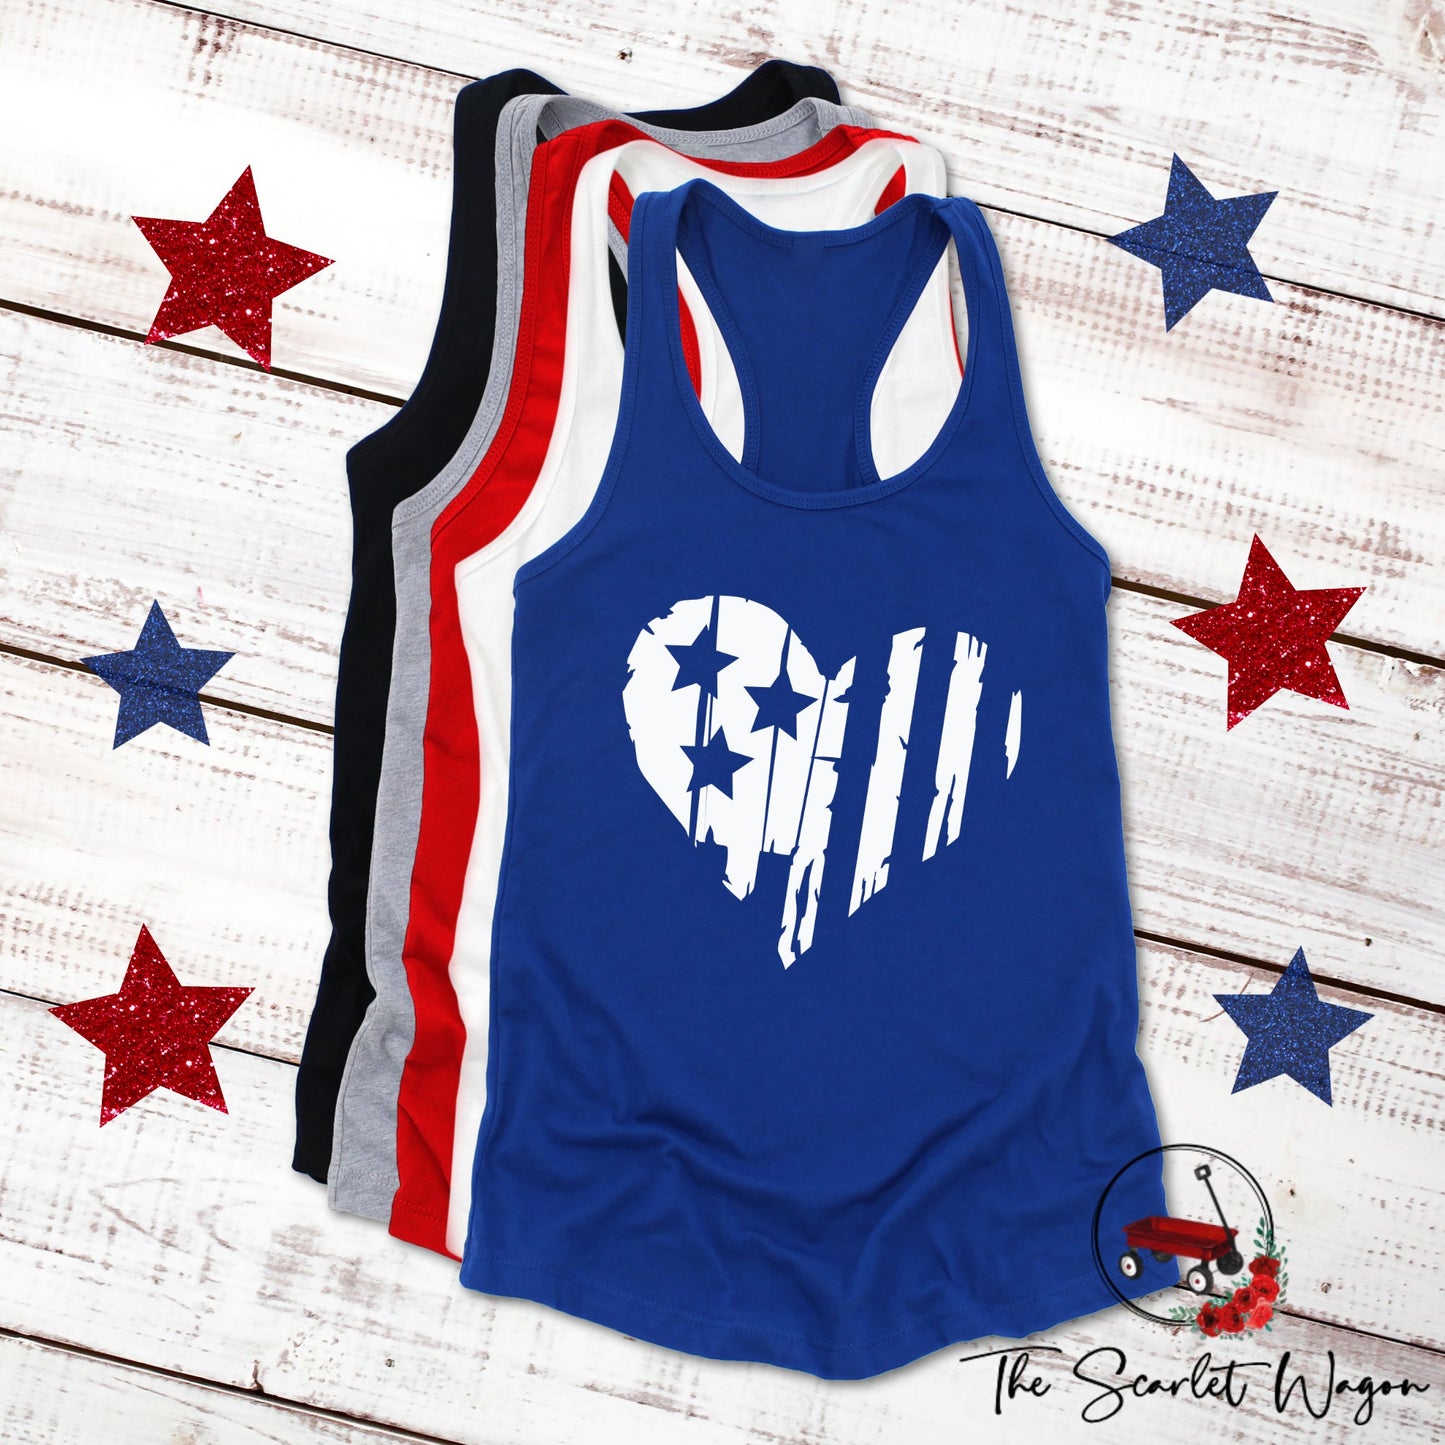 Distressed Heart-Shaped Flag Women's Racerback Tank Patriotic Shirt The Scarlet Wagon Boutique 